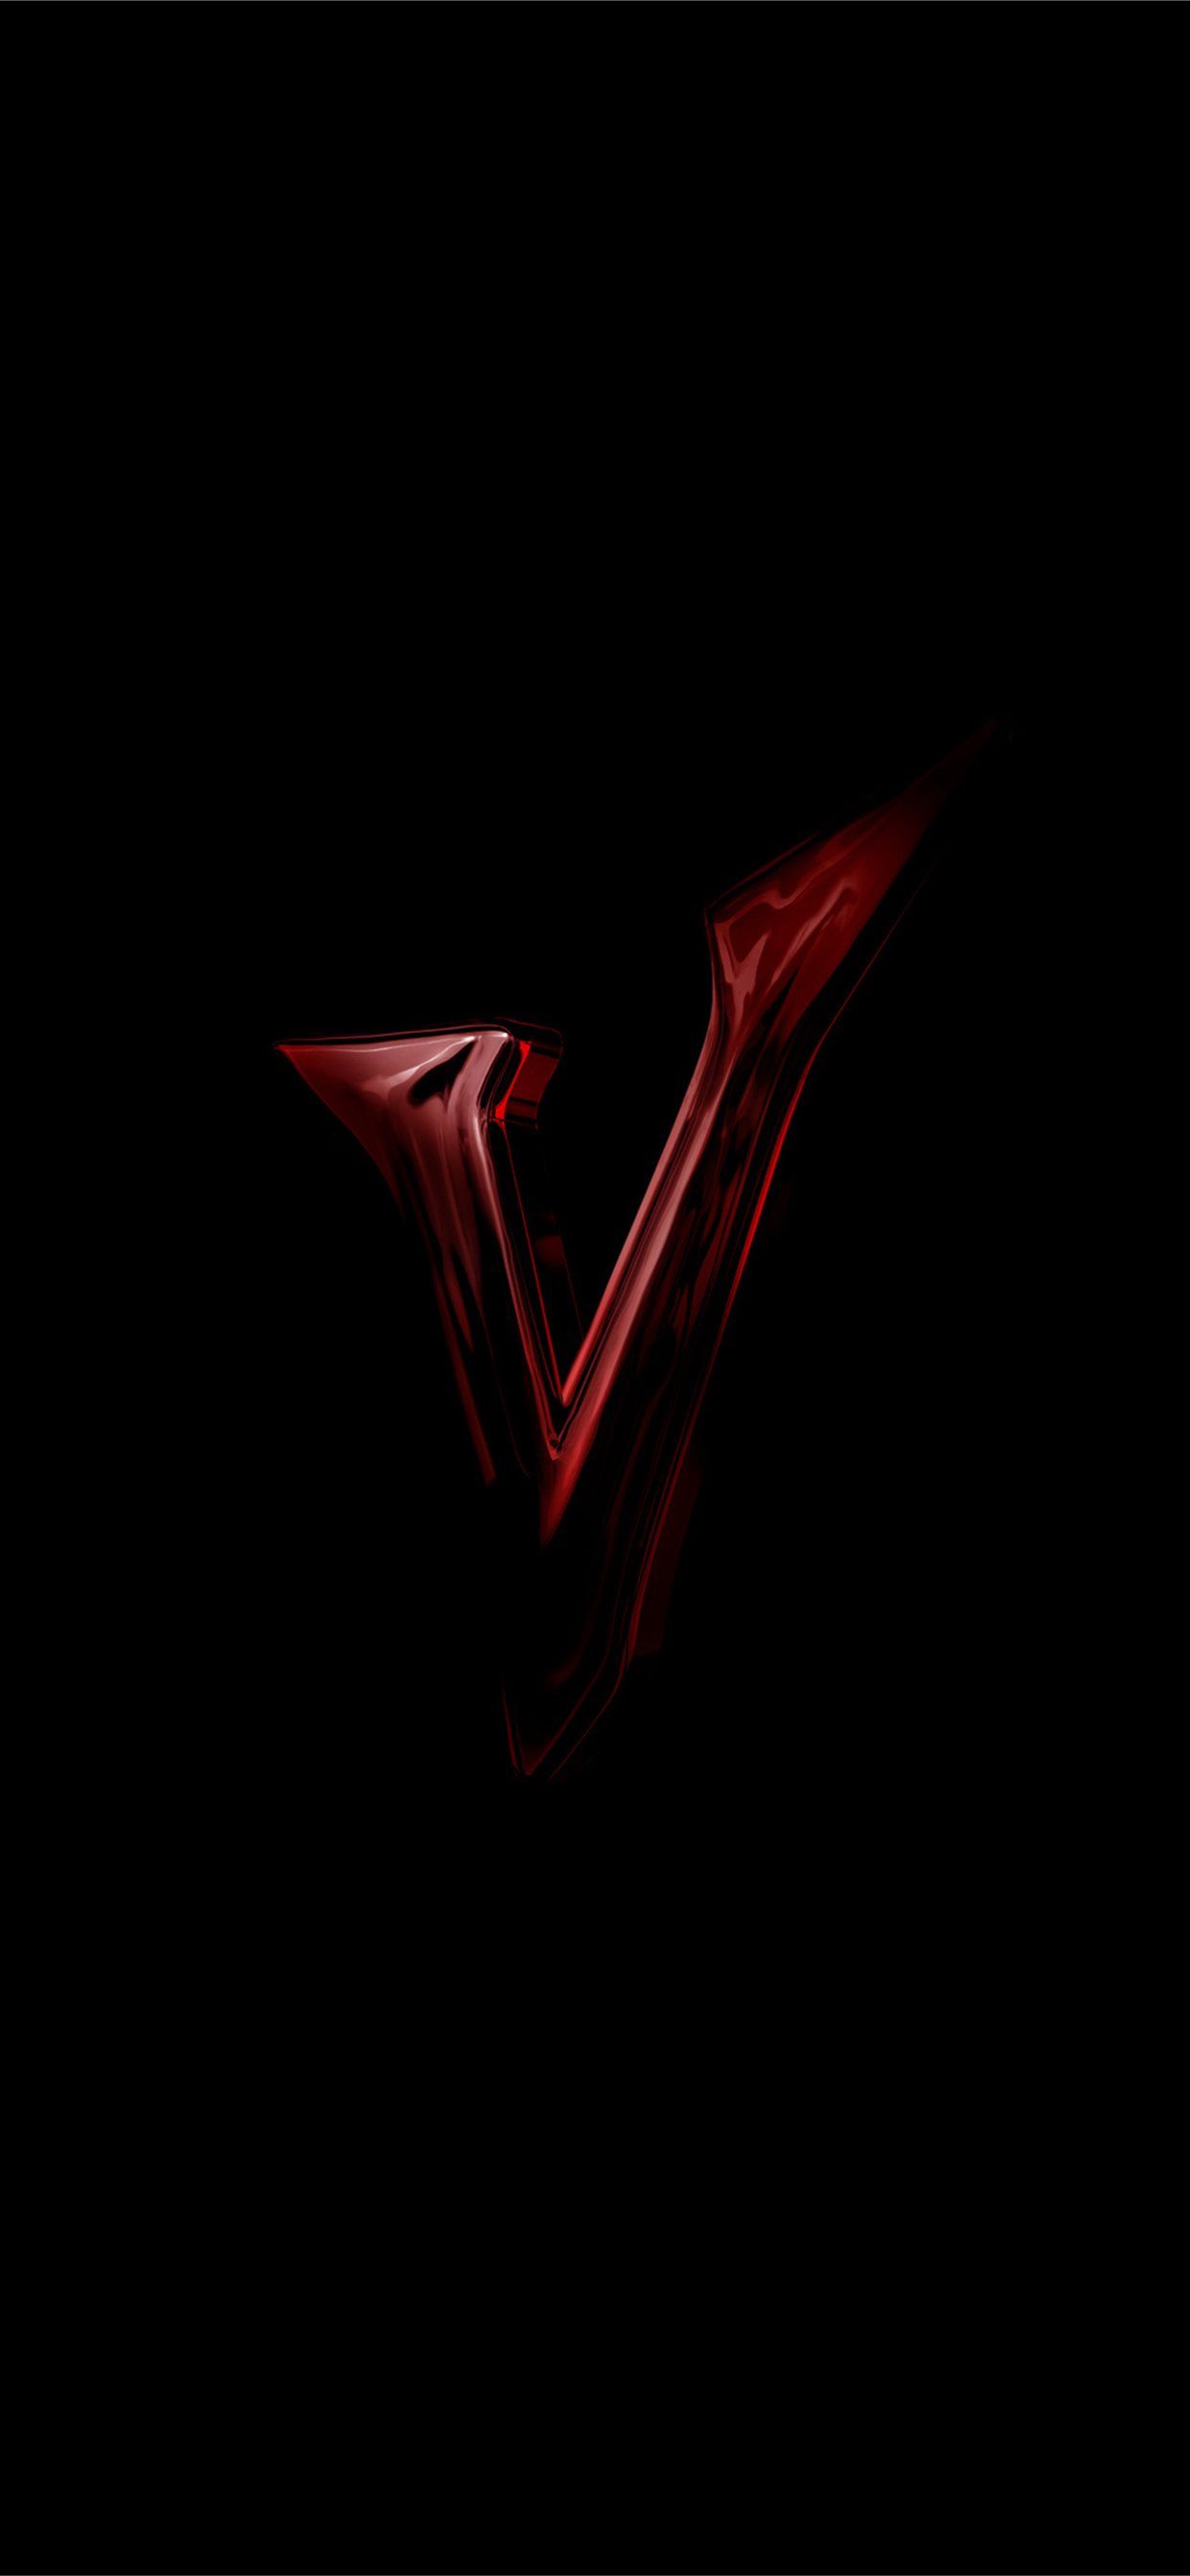 venom let there be carnage logo iPhone X Wallpaper Free Download